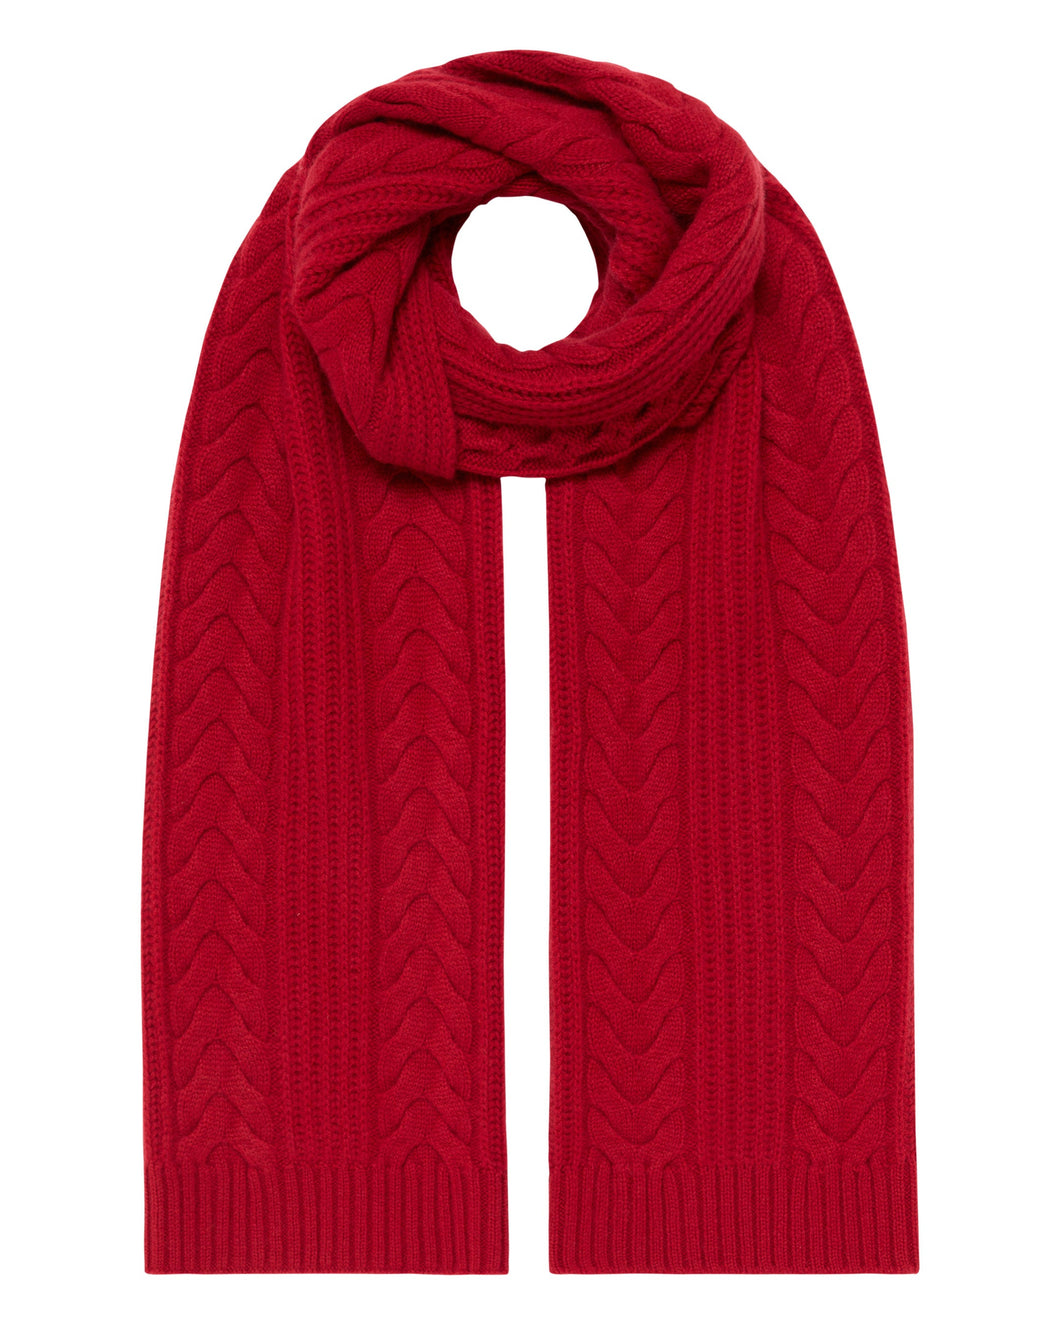 N.Peal Women's Wide Cable Cashmere Scarf Ruby Red